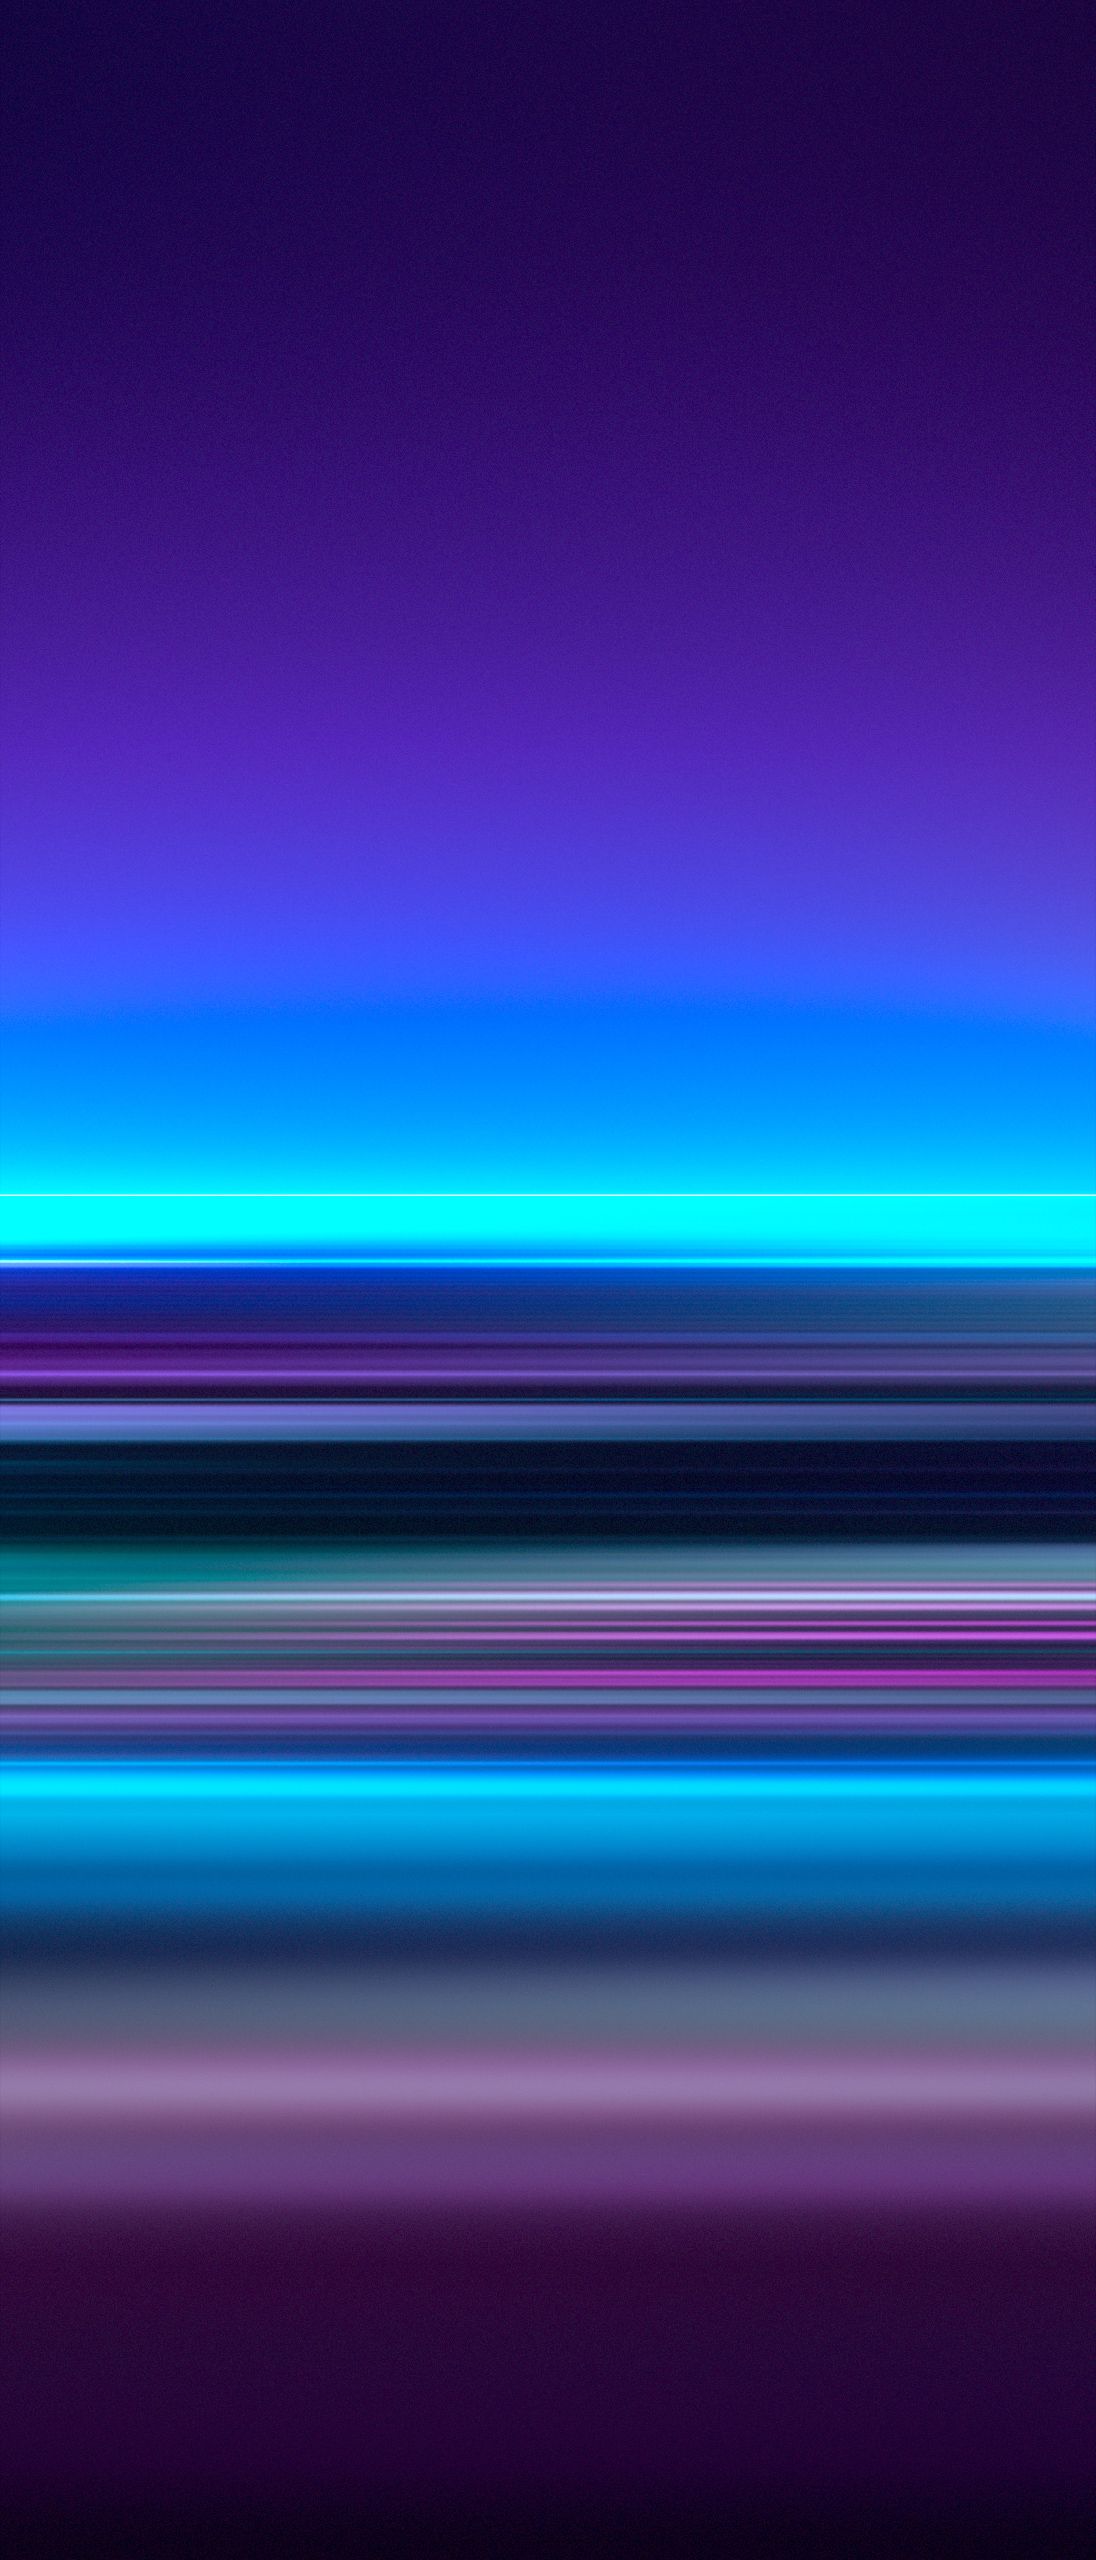 Free Download Sony Xperia 1 Stock Wallpaper 02 1096x2560 1096x2560 For Your Desktop Mobile Tablet Explore 28 Sony Xperia 1 Wallpapers Sony Xperia 1 Wallpapers Sony Xperia Wallpaper Sony Xperia Wallpapers